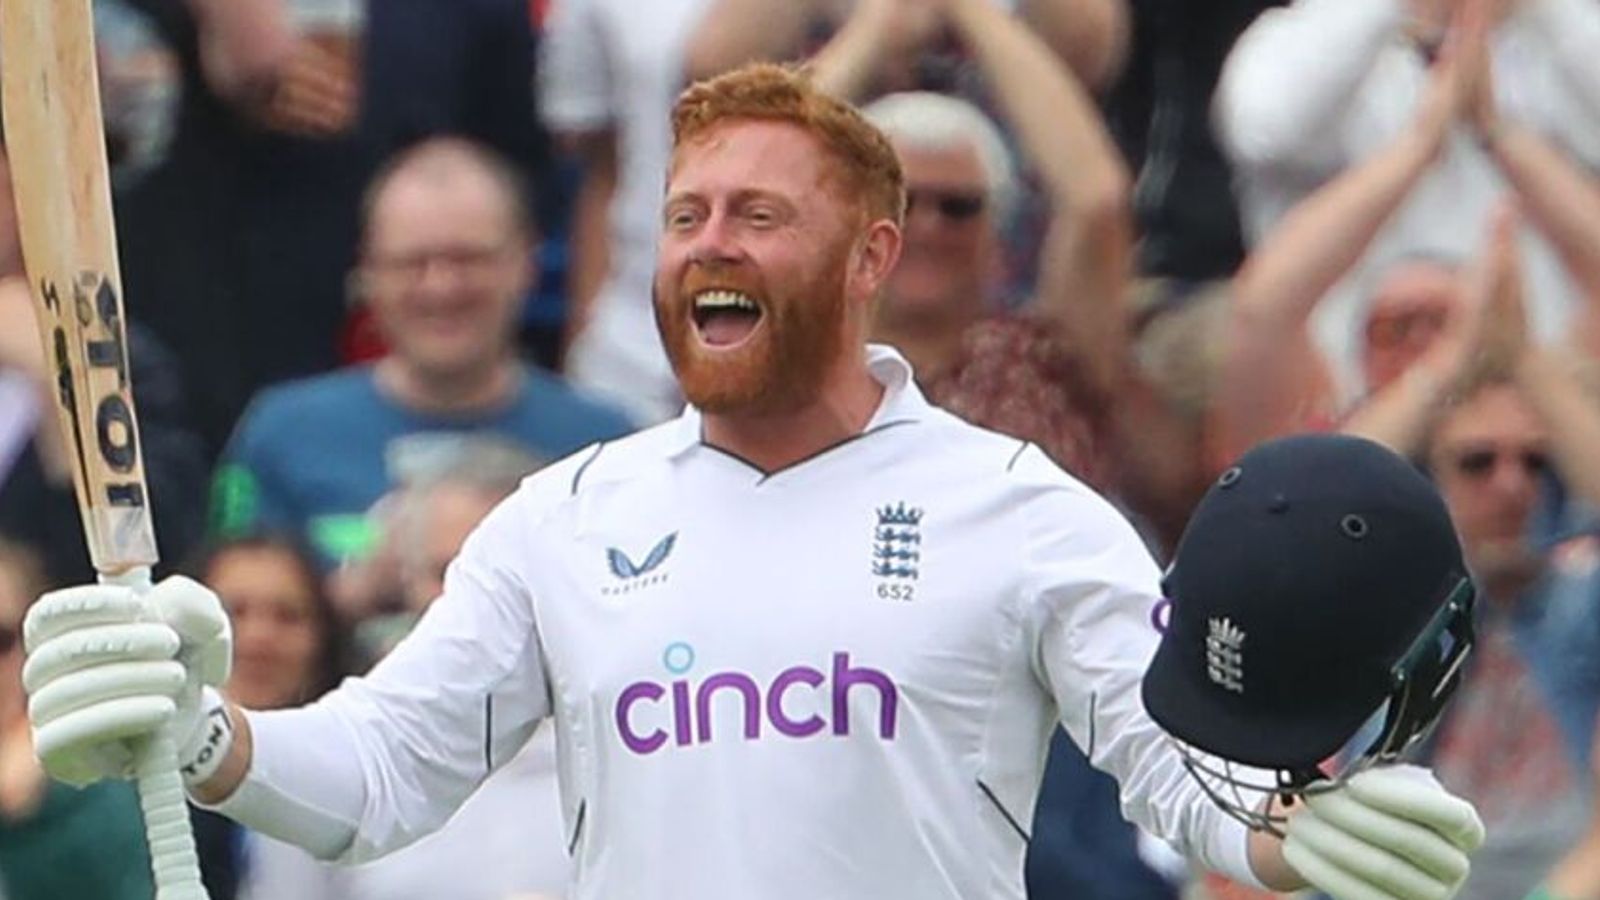 Jonny Bairstow, Harry Brook, Nat Sciver and Sophia Dunkley among shortlisted candidates for PCA Player of the Year